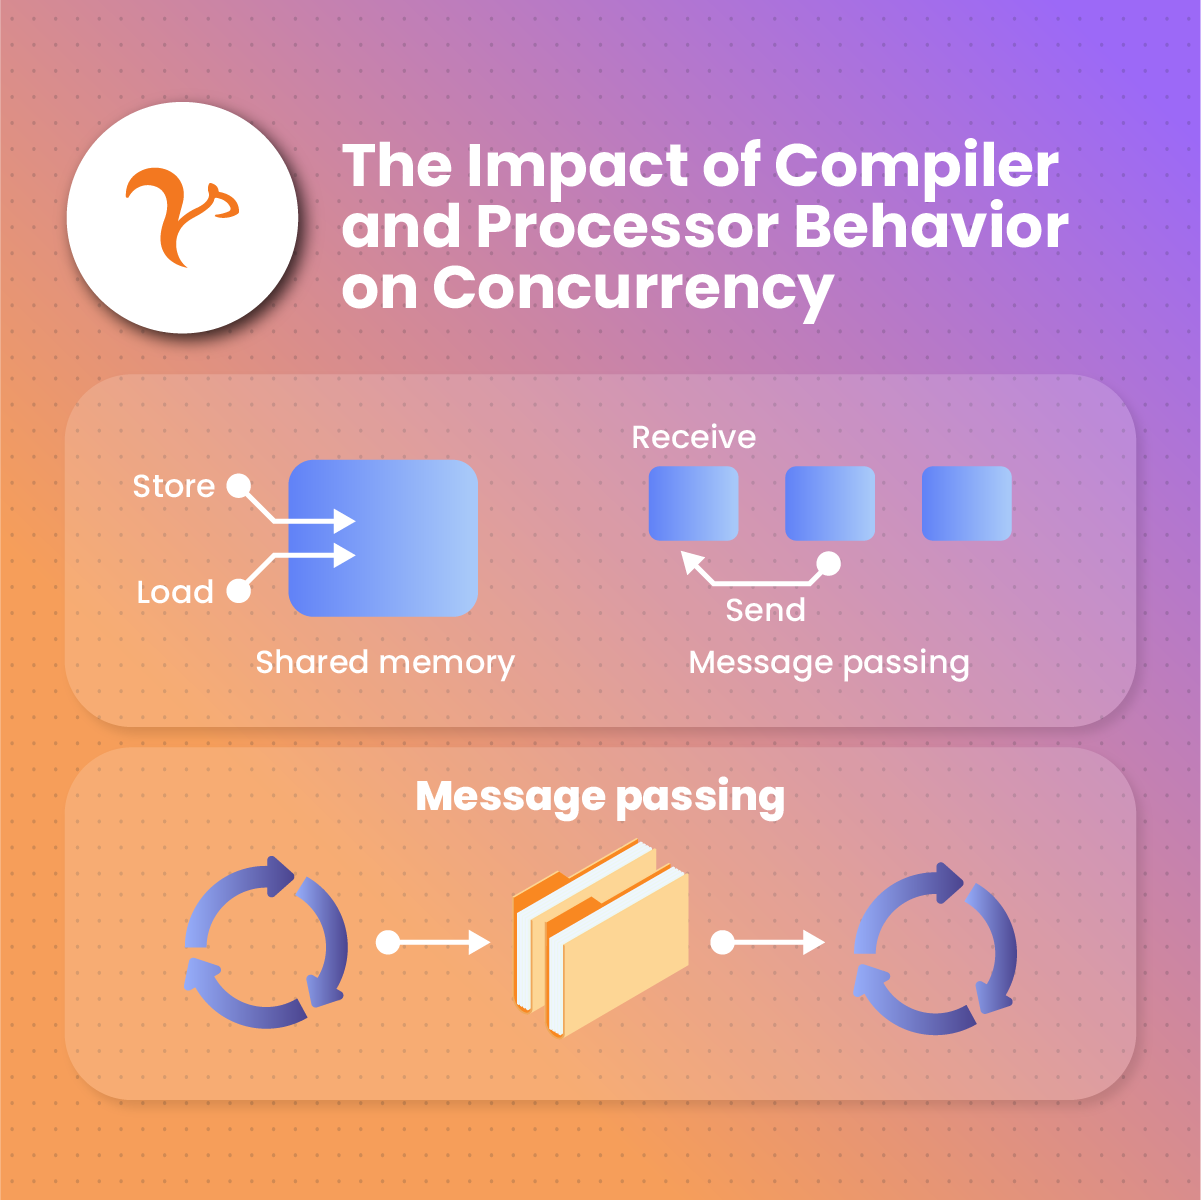 The Impact of Compiler and Processor Behavior on Concurrency